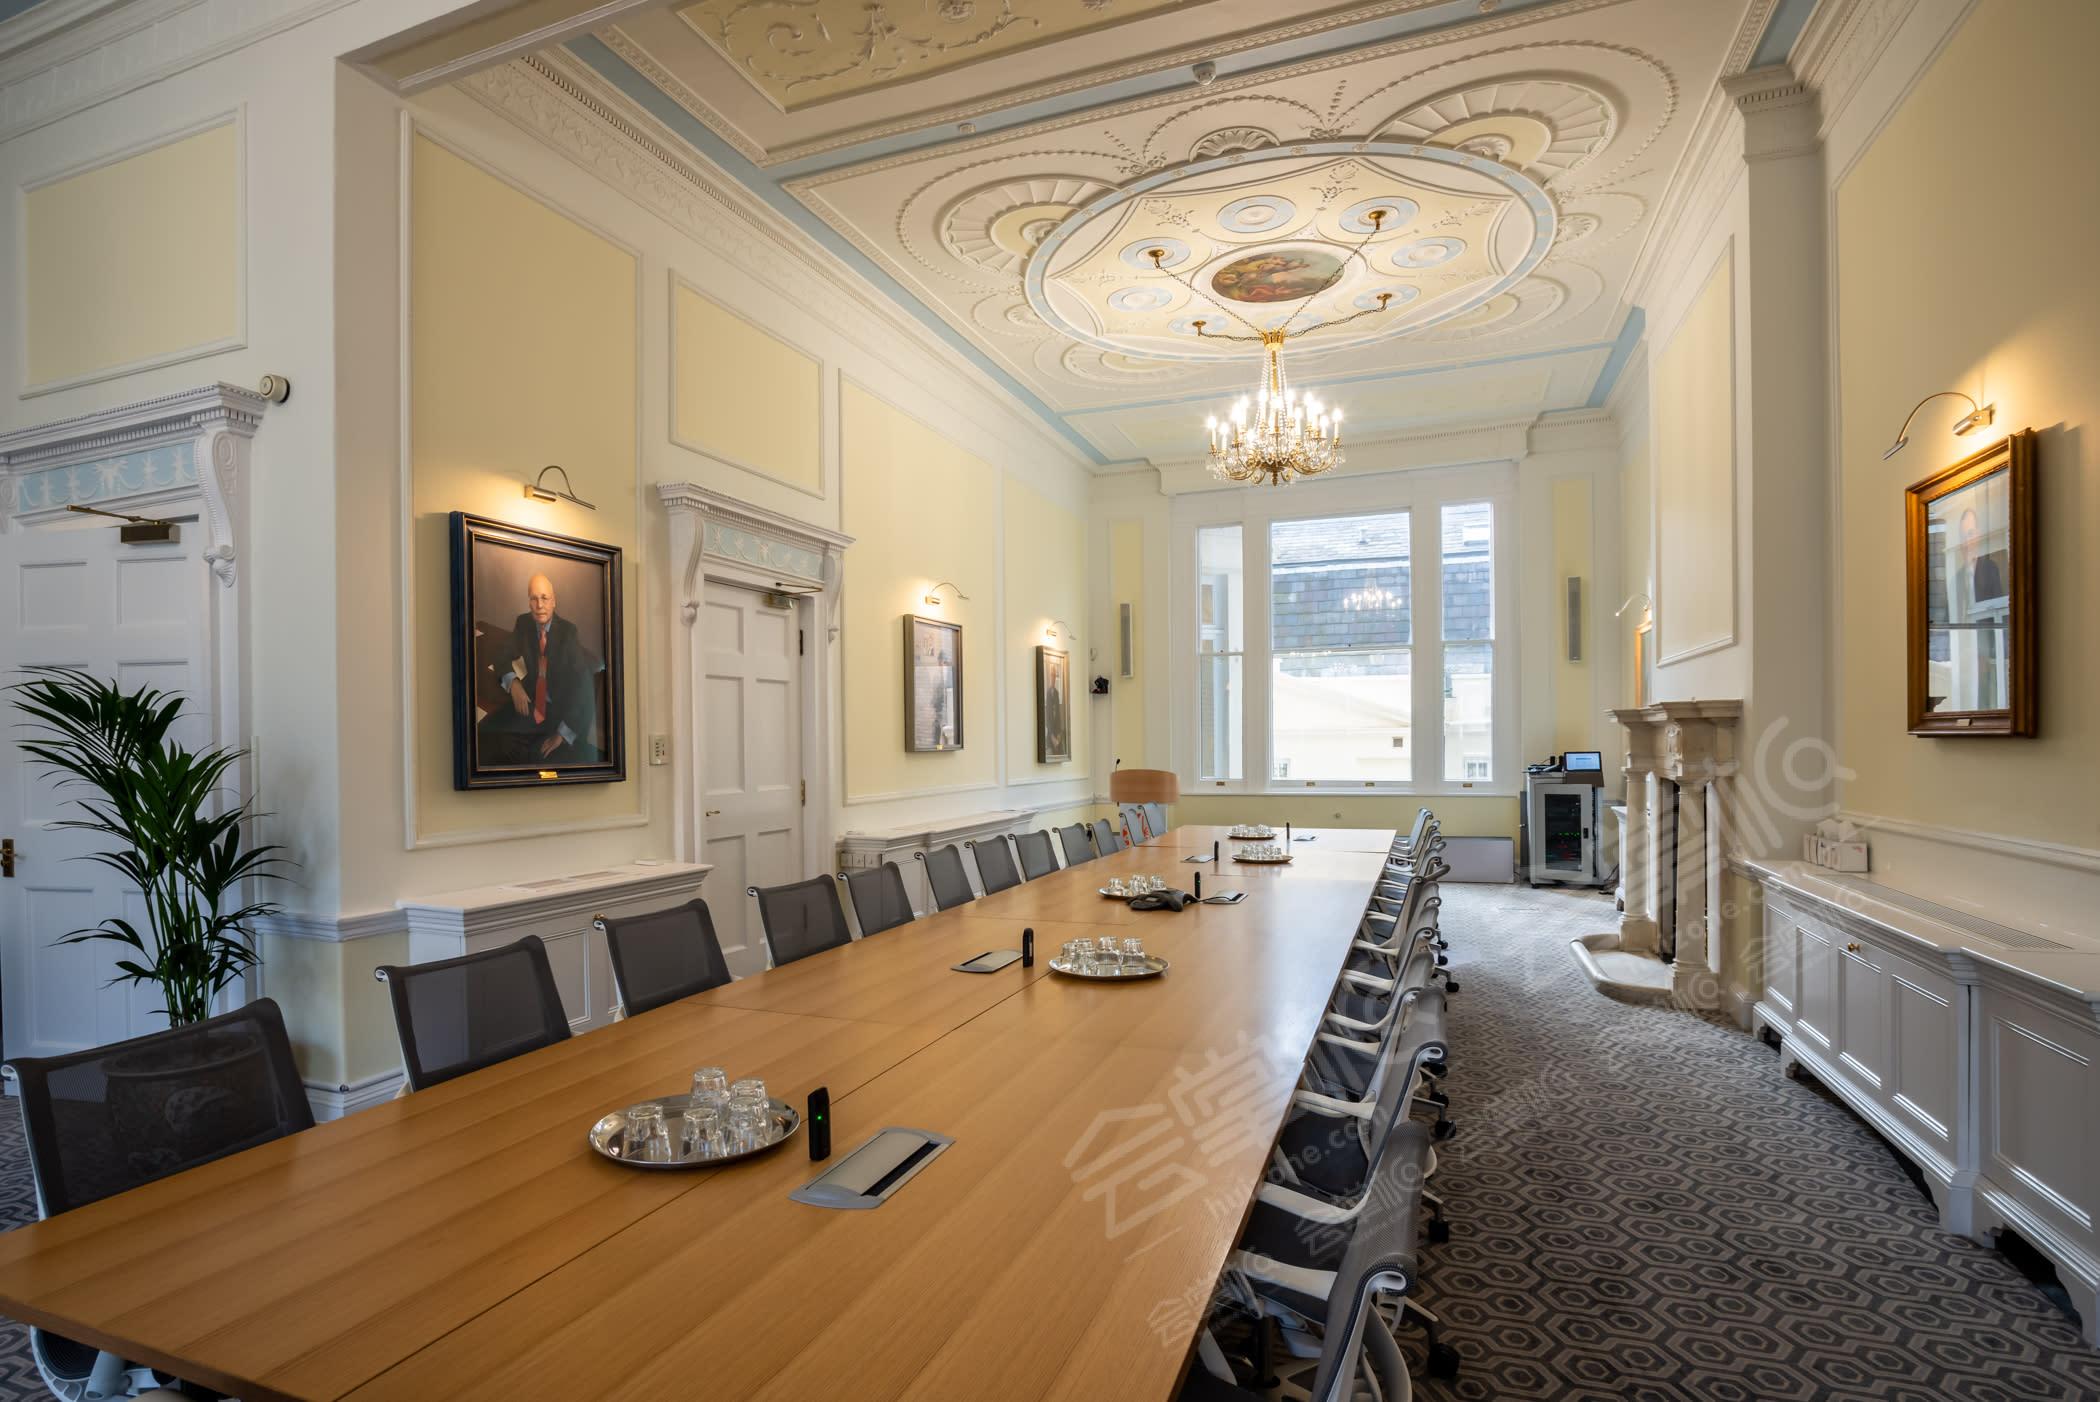 Flexible Period Rooms with Original Features